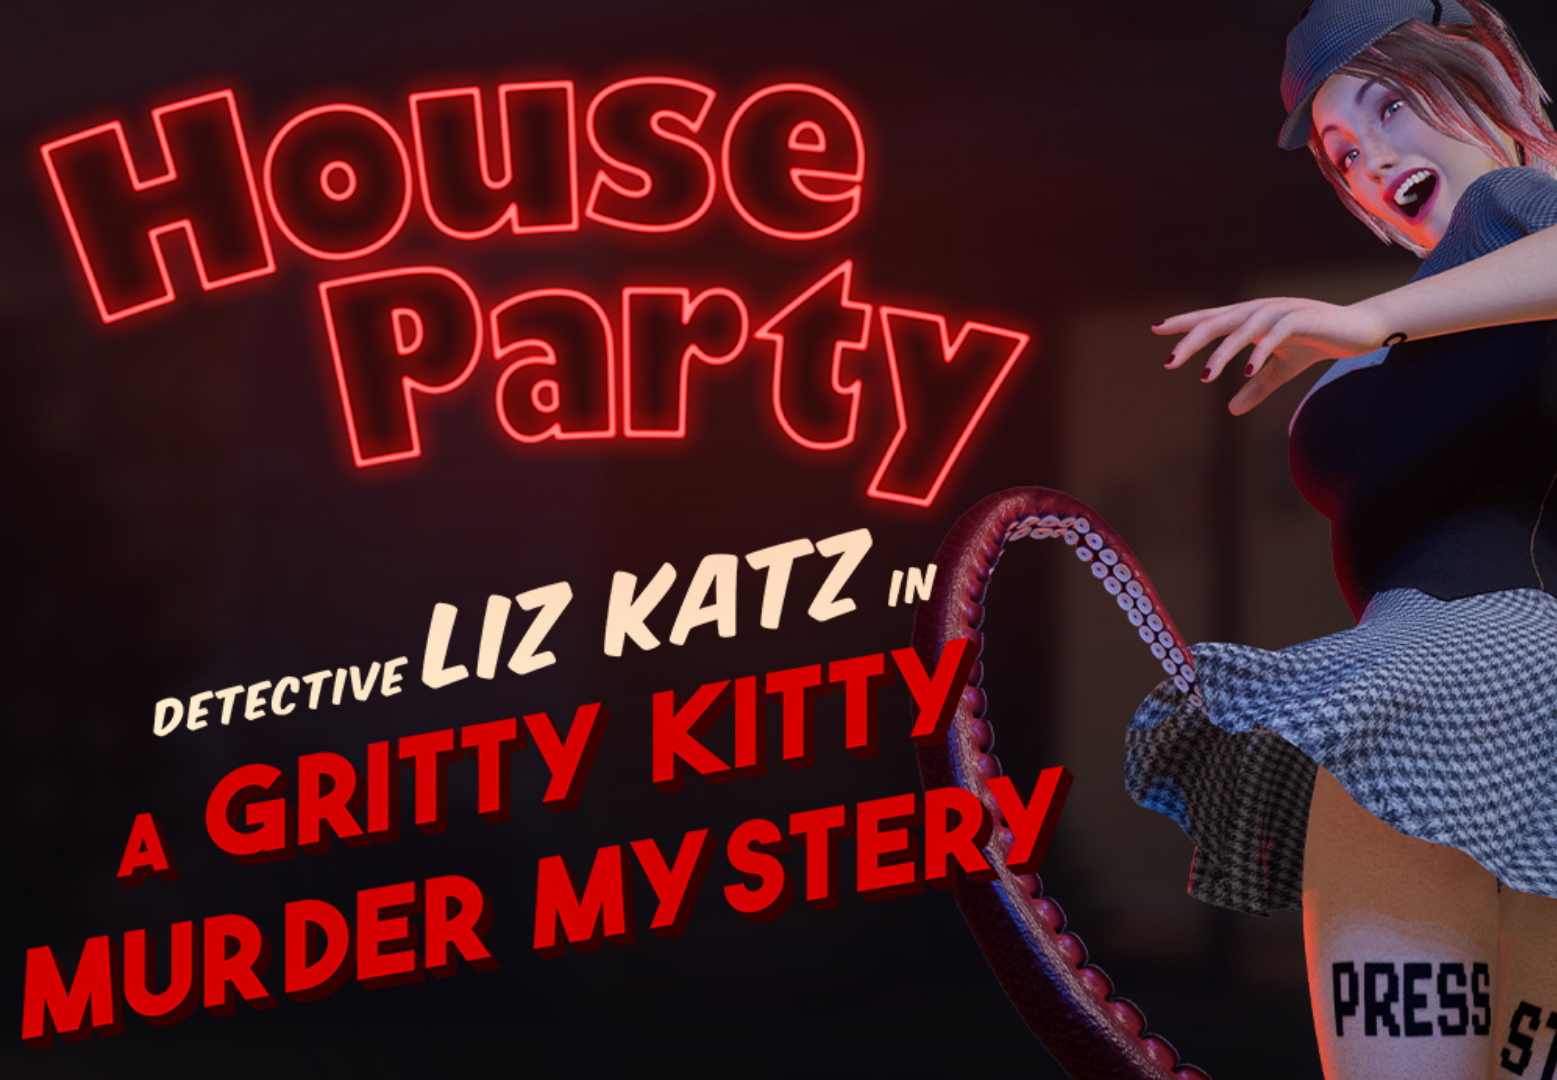 House Party - Detective Liz Katz in a Gritty Kitty Murder Mystery Expansion Pack DLC Steam CD Key